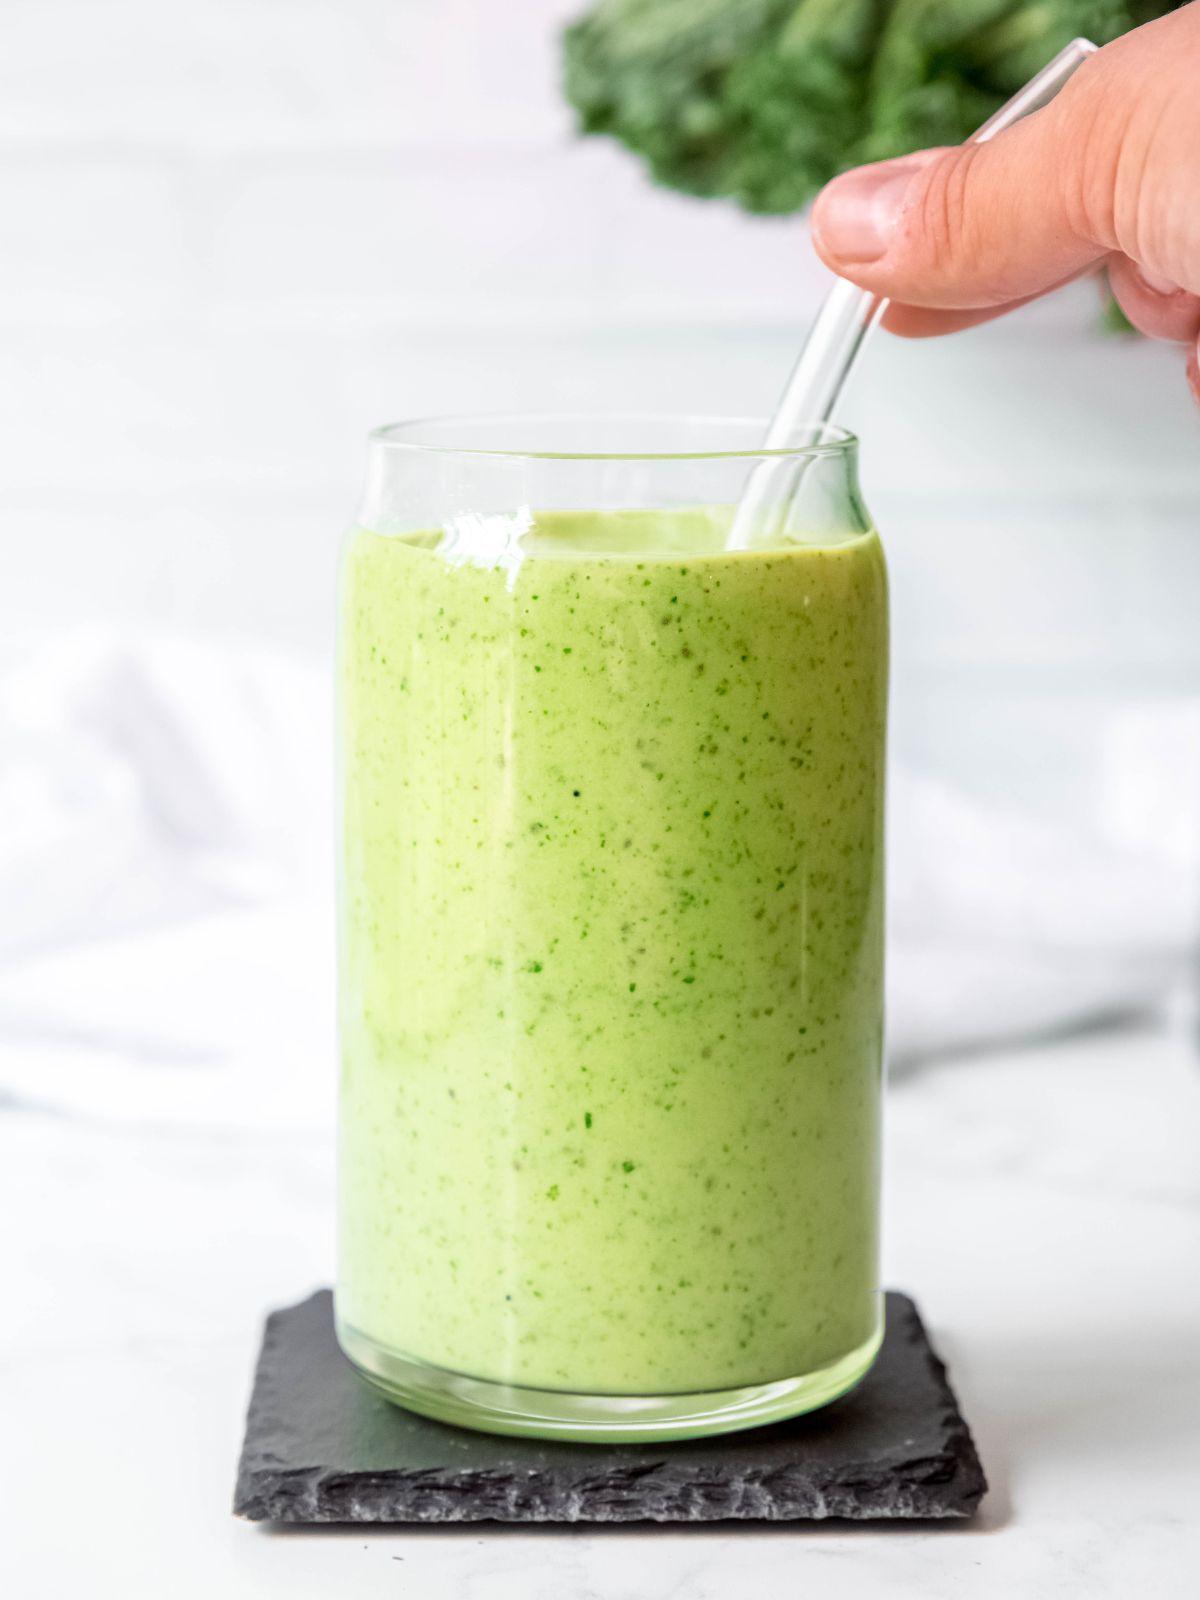 ow carb banana spinach smoothie